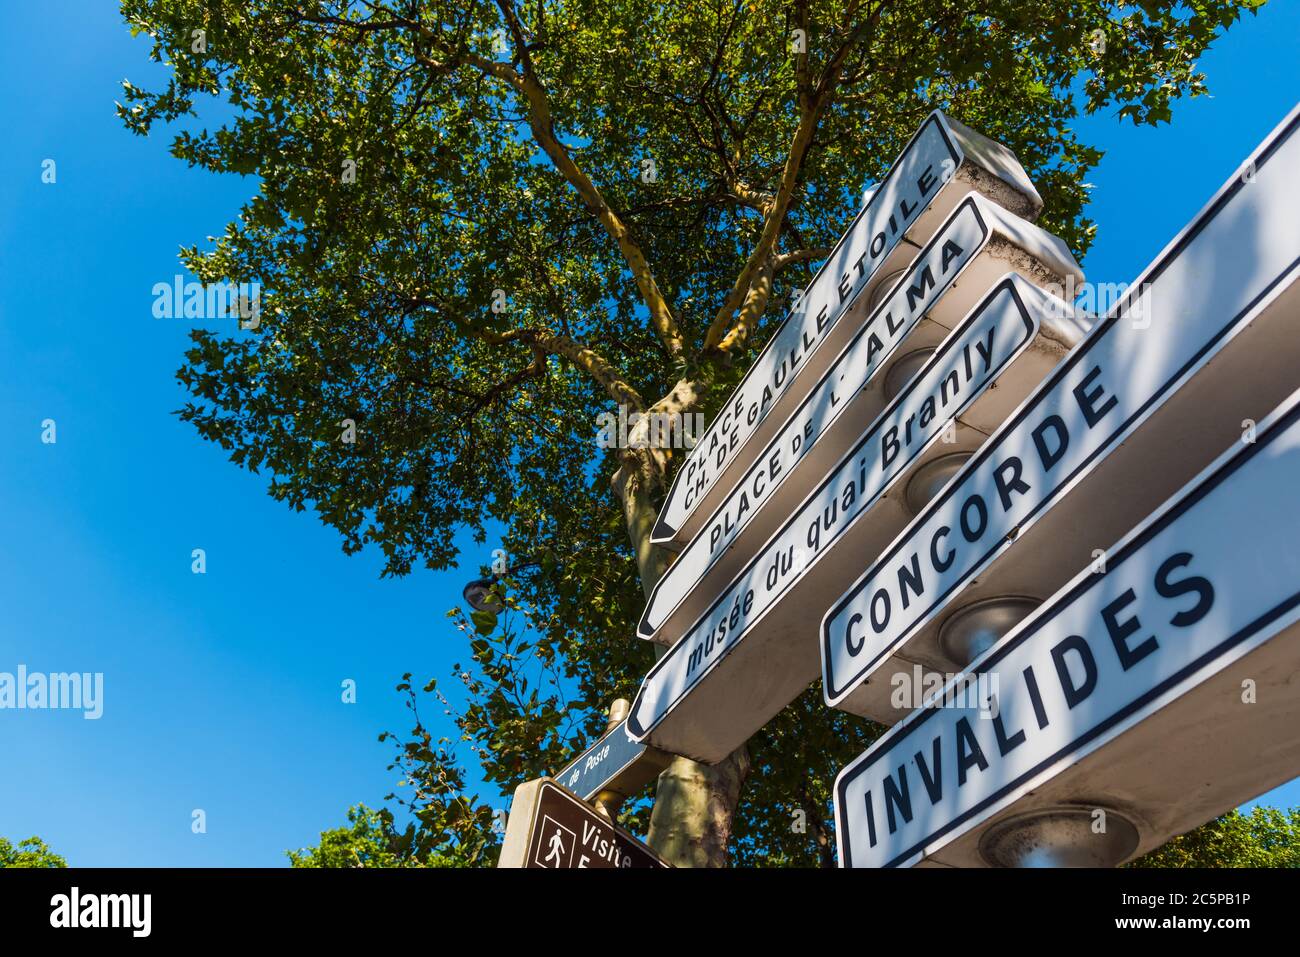 Directional signs in world famous Paris, France Stock Photo